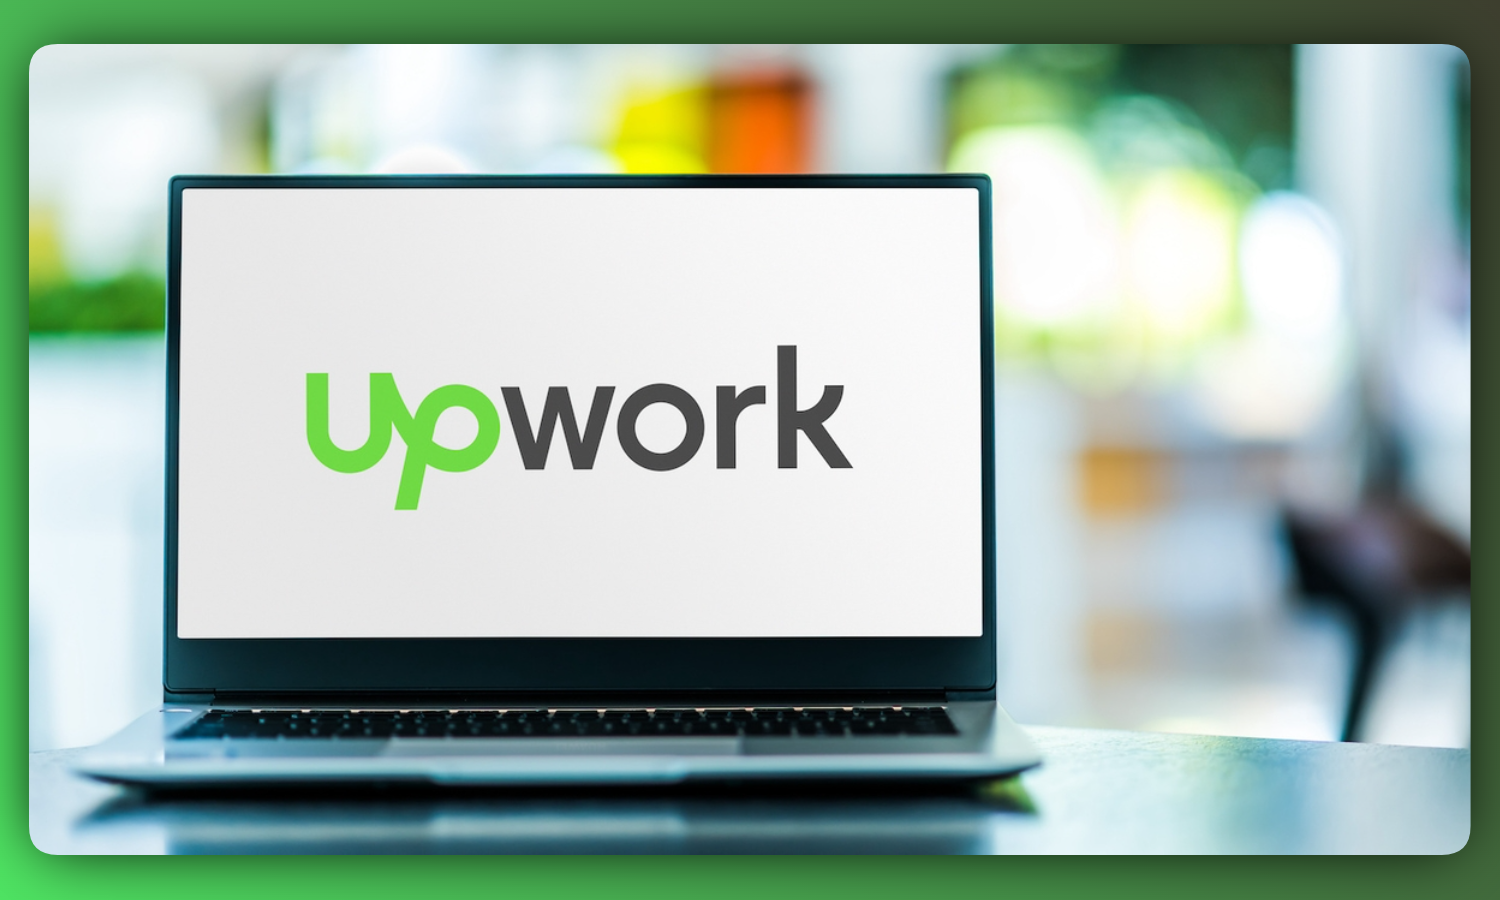 Upwork is in tune with the times as it transcends into a more progressive work culture - 6 analysts bullish